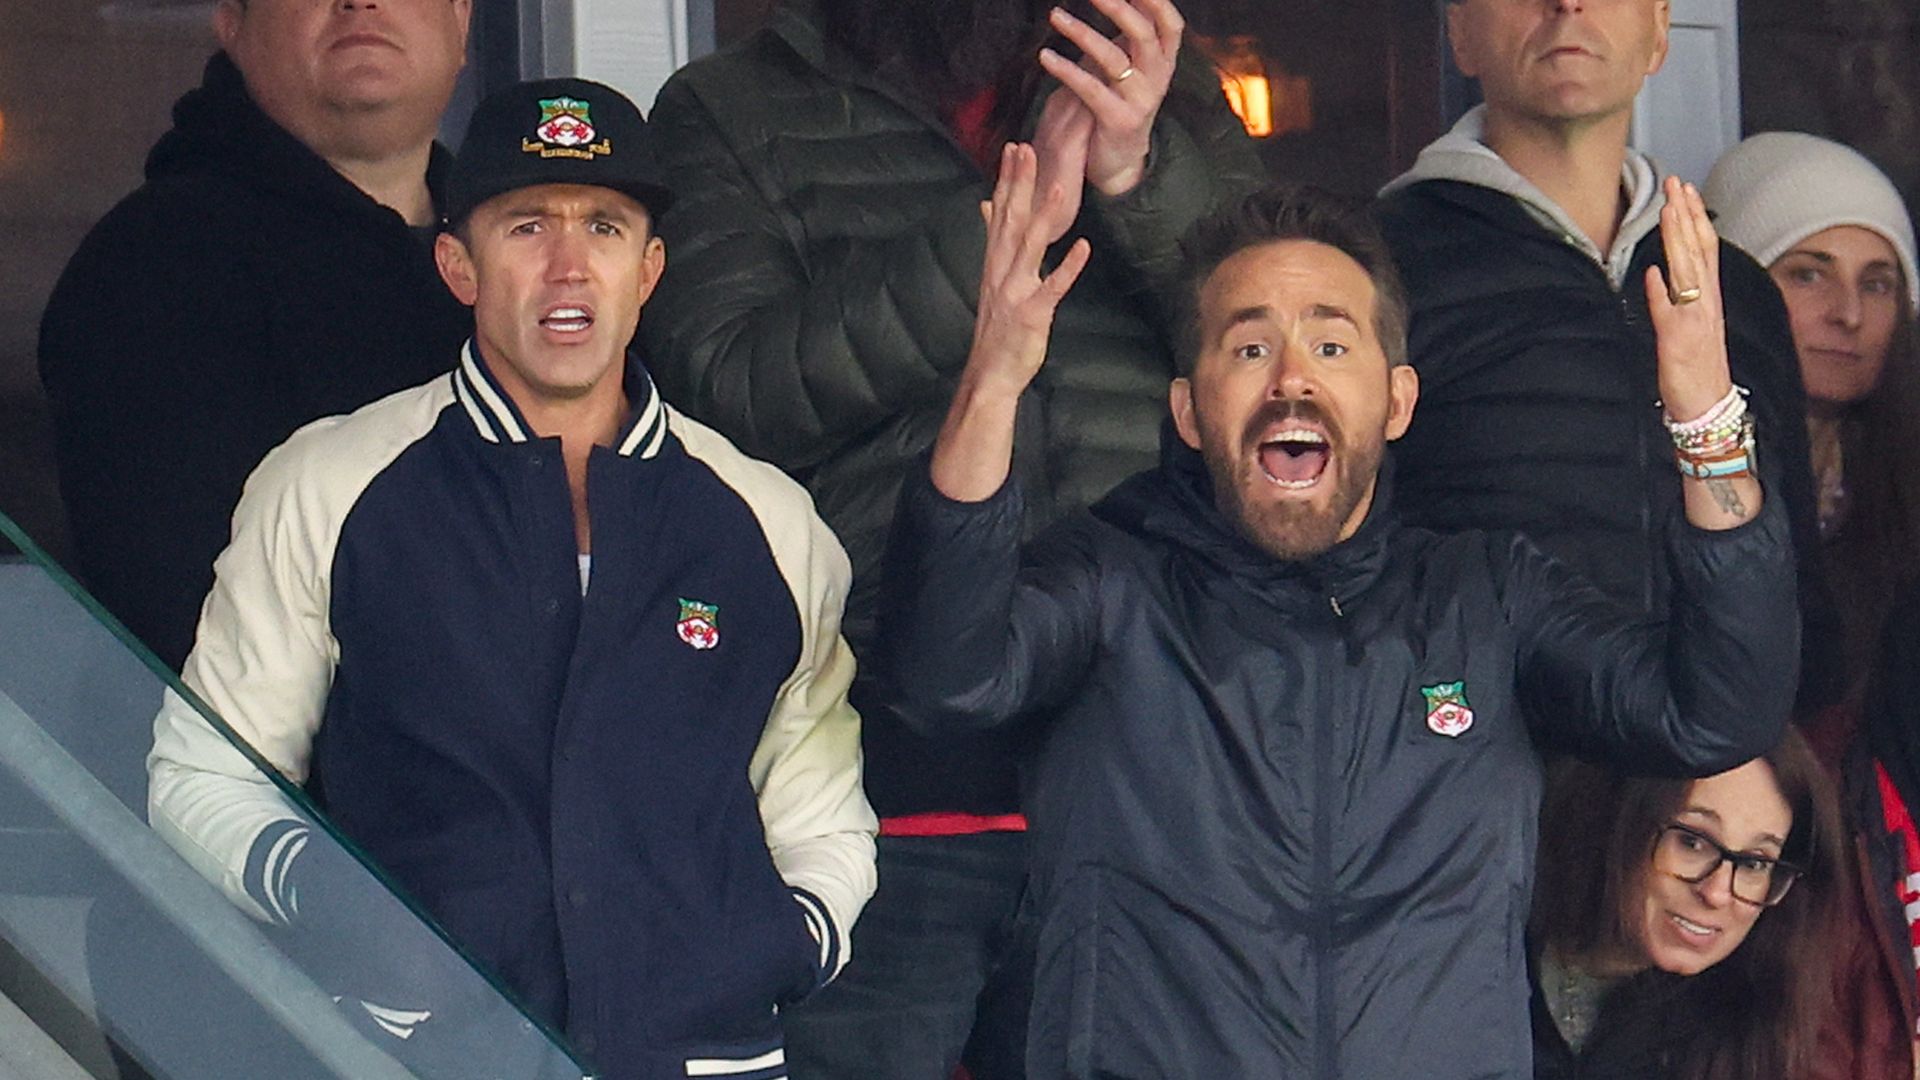 Ryan Reynolds and Rob McElhenney stood reacting to a football game with other fans